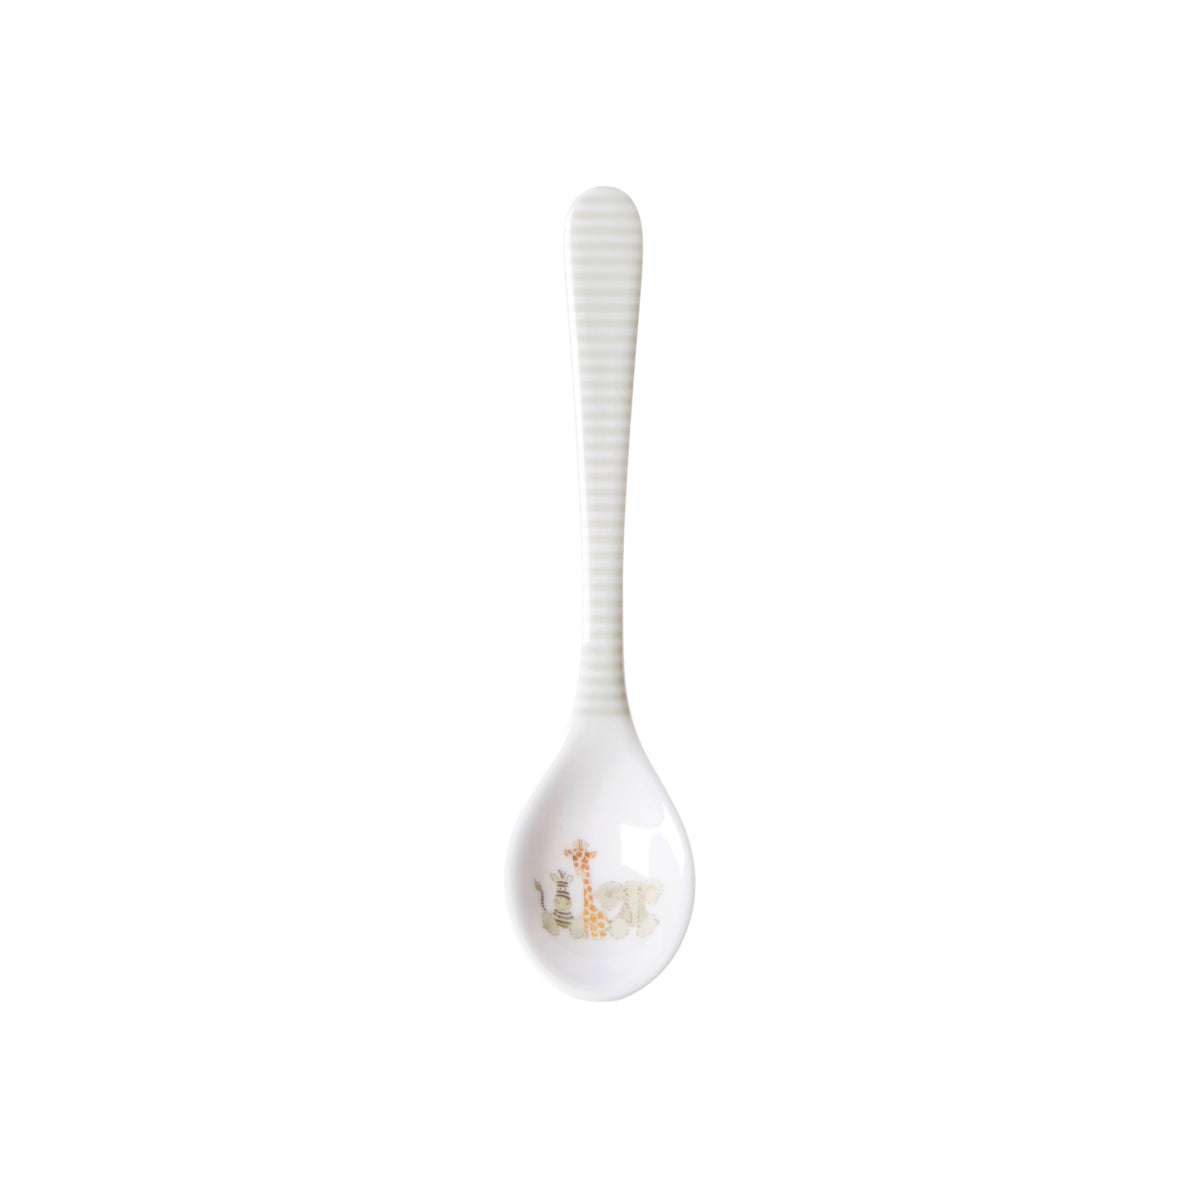 Bears & Balloons Childrens Baby Spoon by Sophie Allport